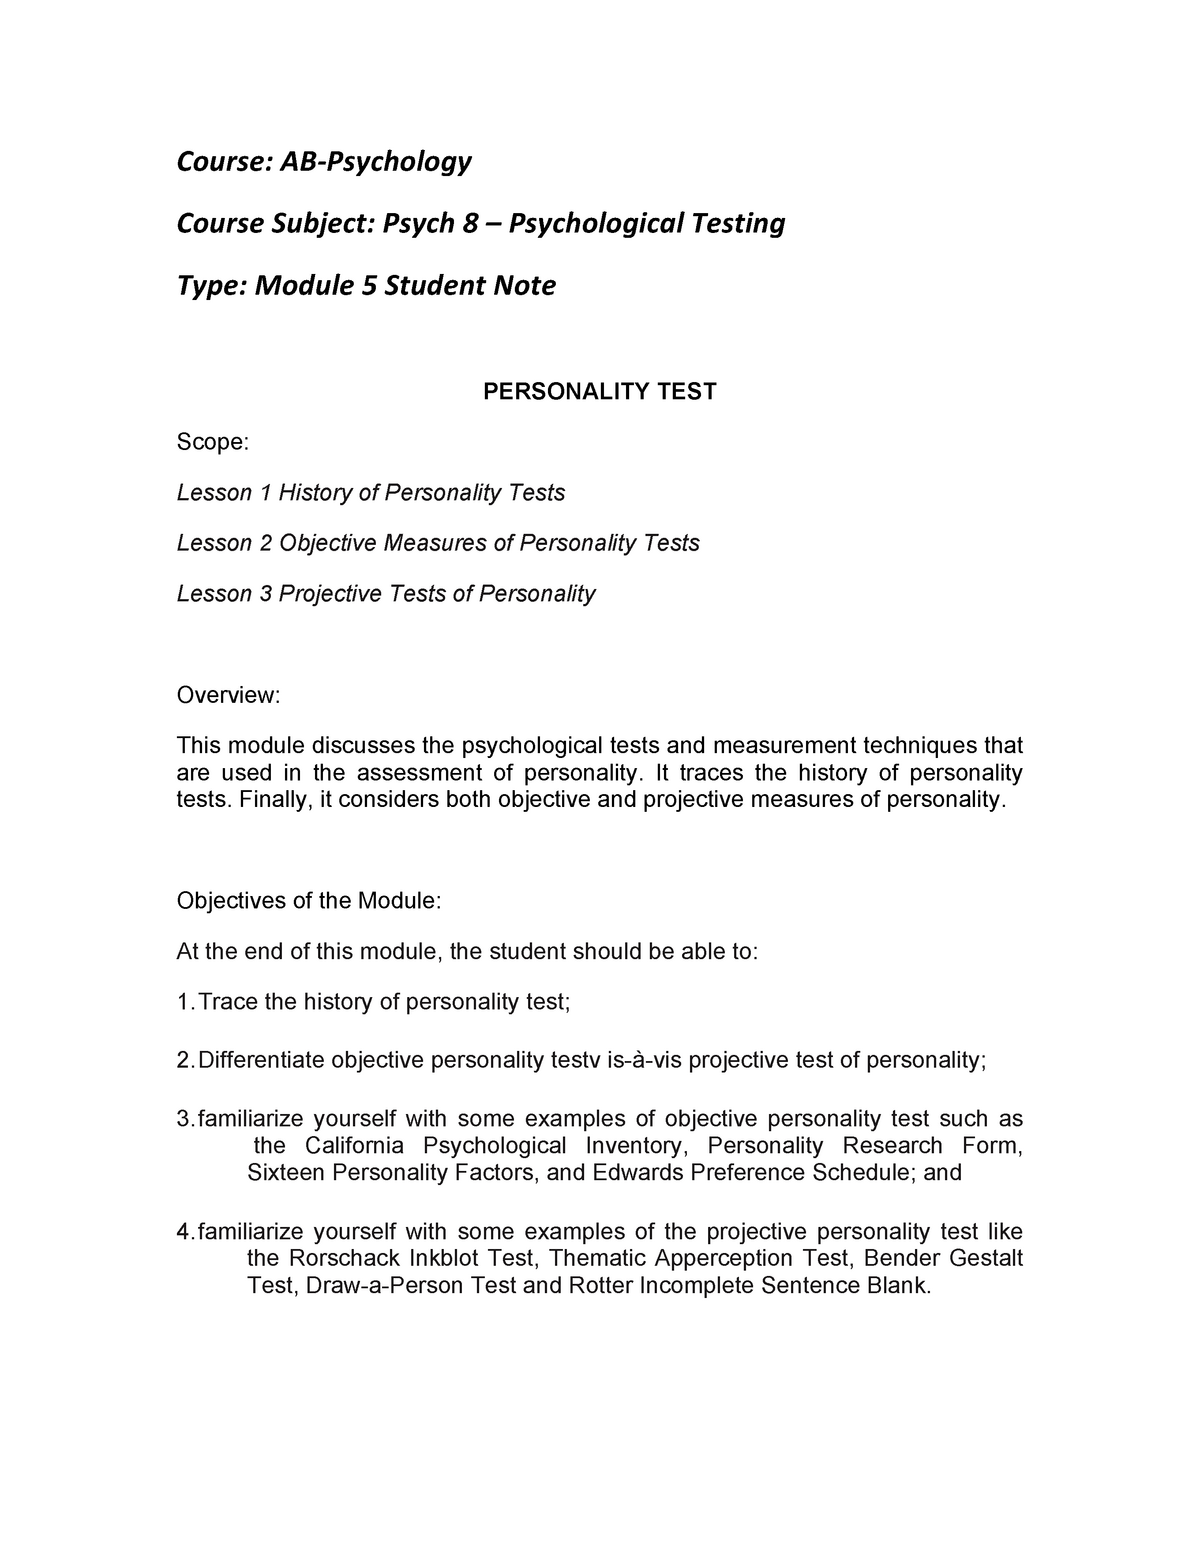 Psy 8 Psychological Testing - Module 5 Personality Test - Course: AB ...